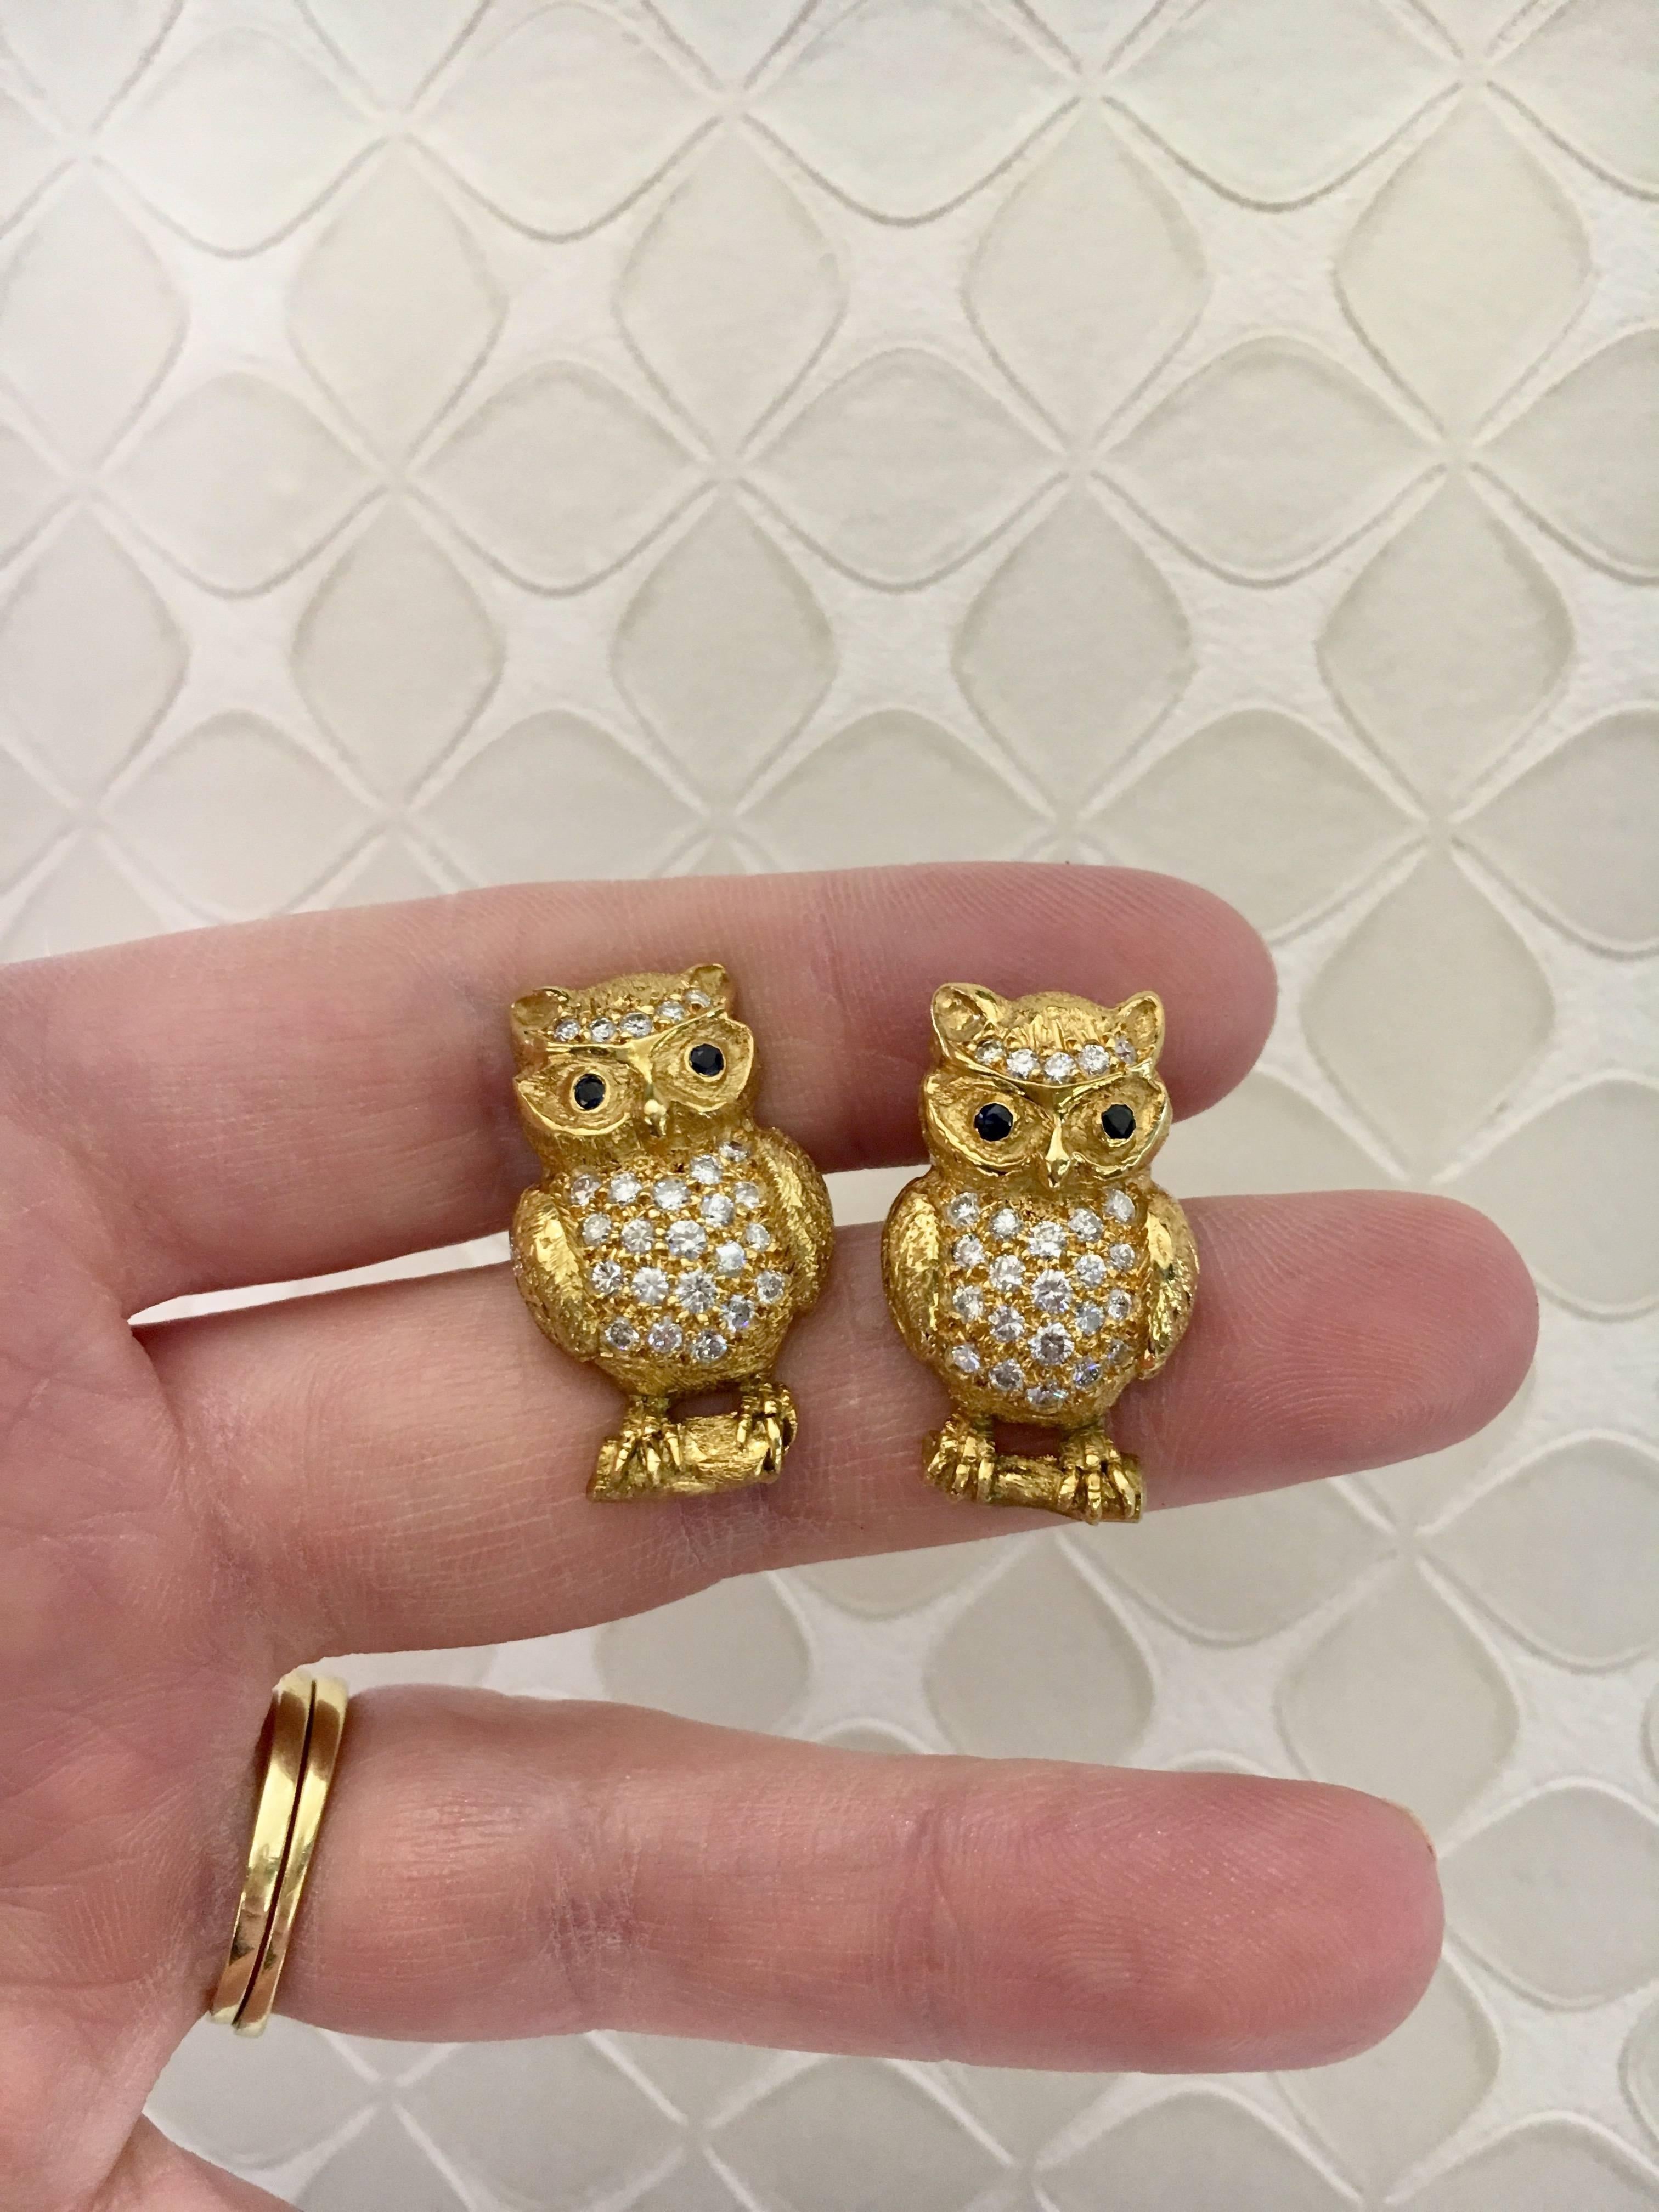 One pair of owl cufflinks in 18kt yellow gold set with blue sapphire eyes and diamonds.